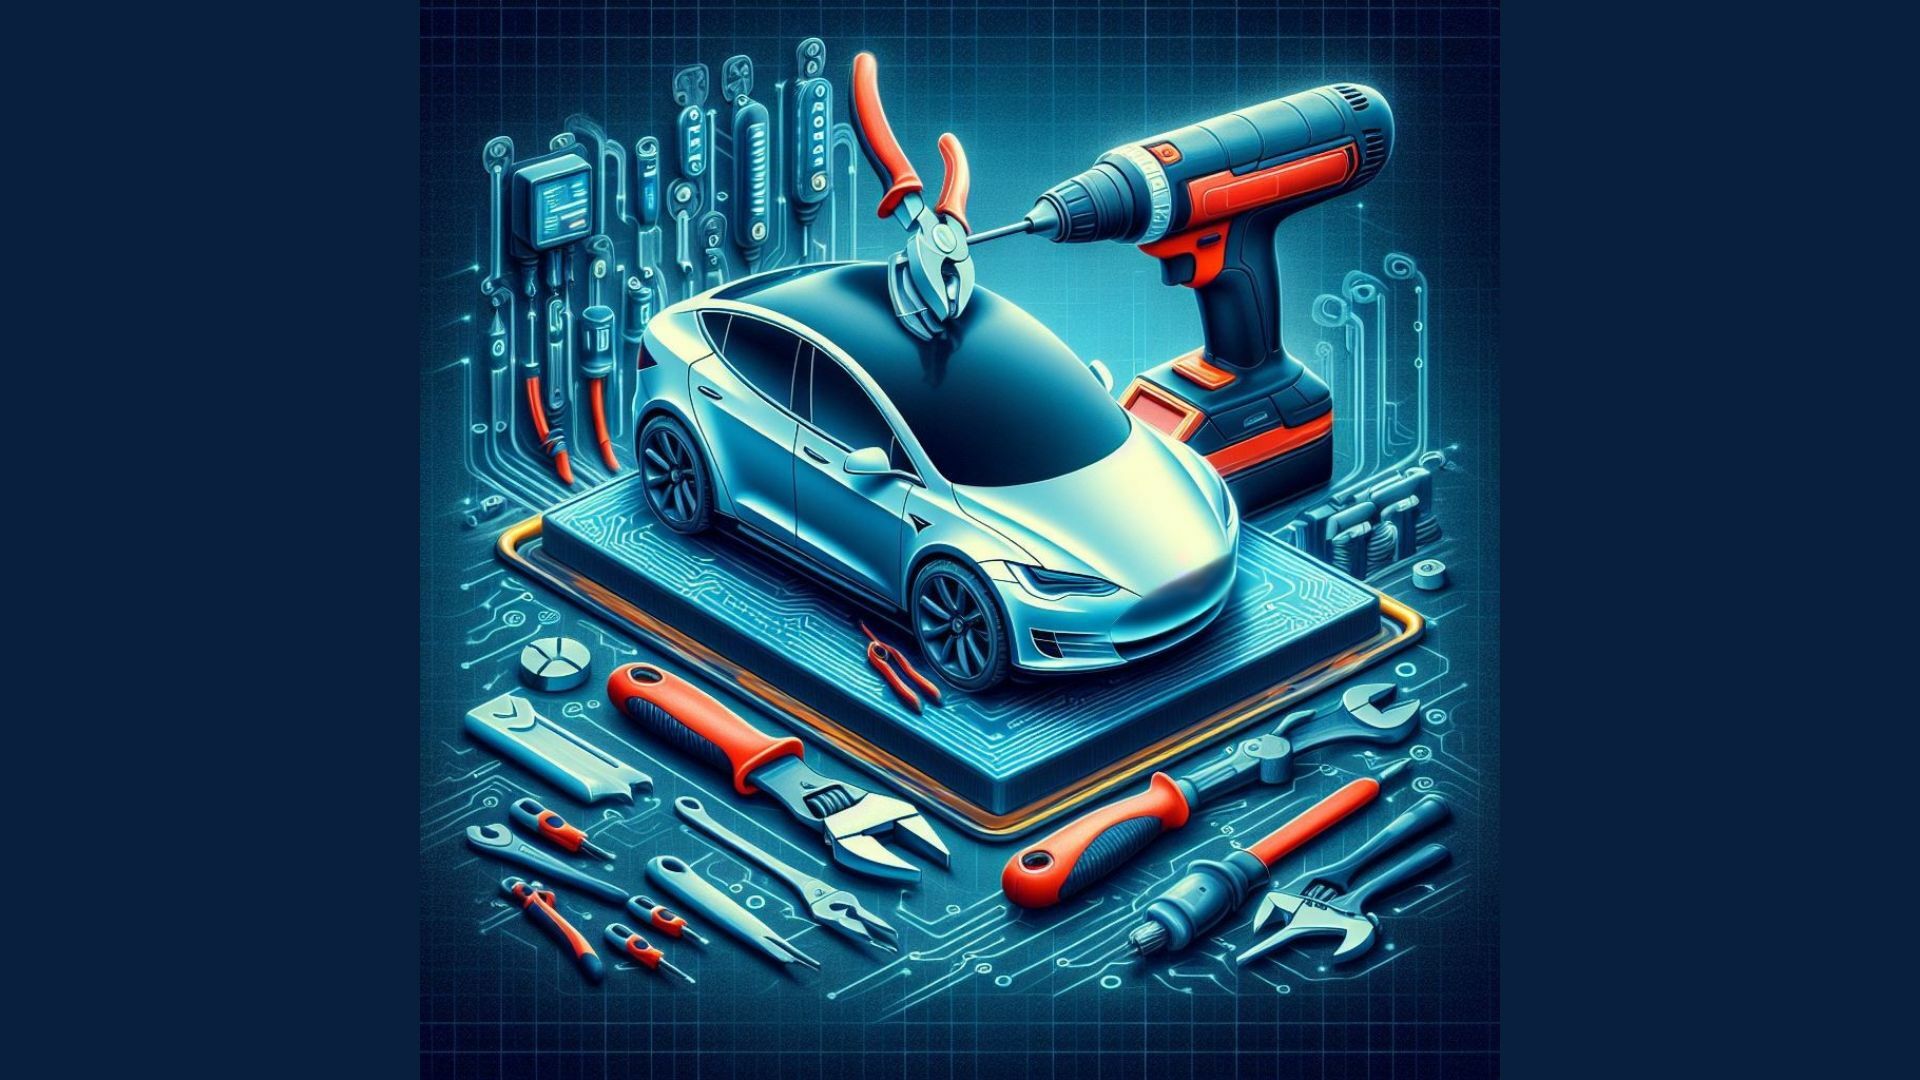 Insulated Hand Tools and Electric Car